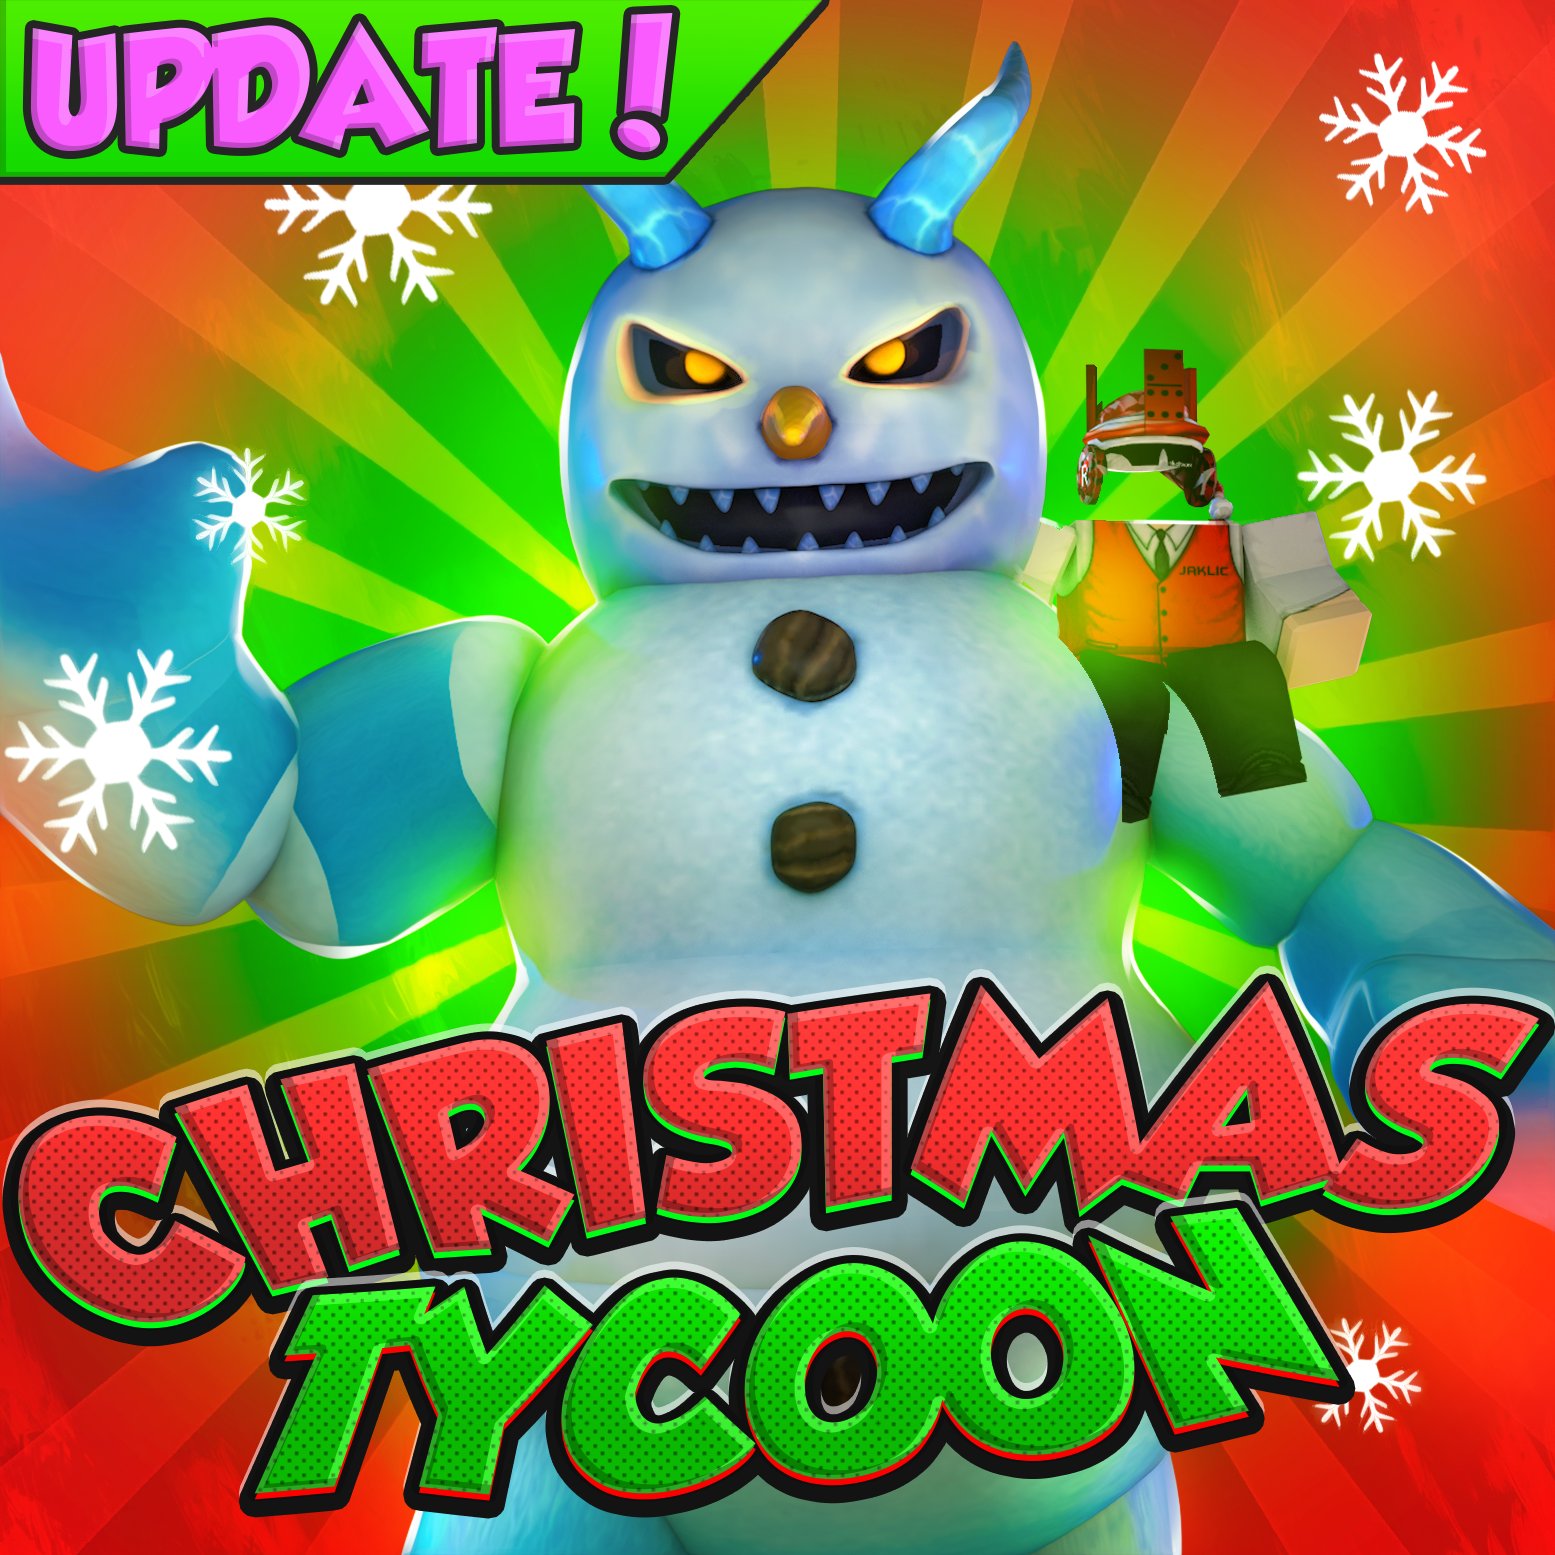 Jaklic On Twitter Christmas Tycoon Update Is Here Explore The North Pole And Save The Christmas Also Use A Brand New Code Evilupdate To Get Penguin Package Giver And A Snowy Aura - roblox christmas tycoon 2016 code